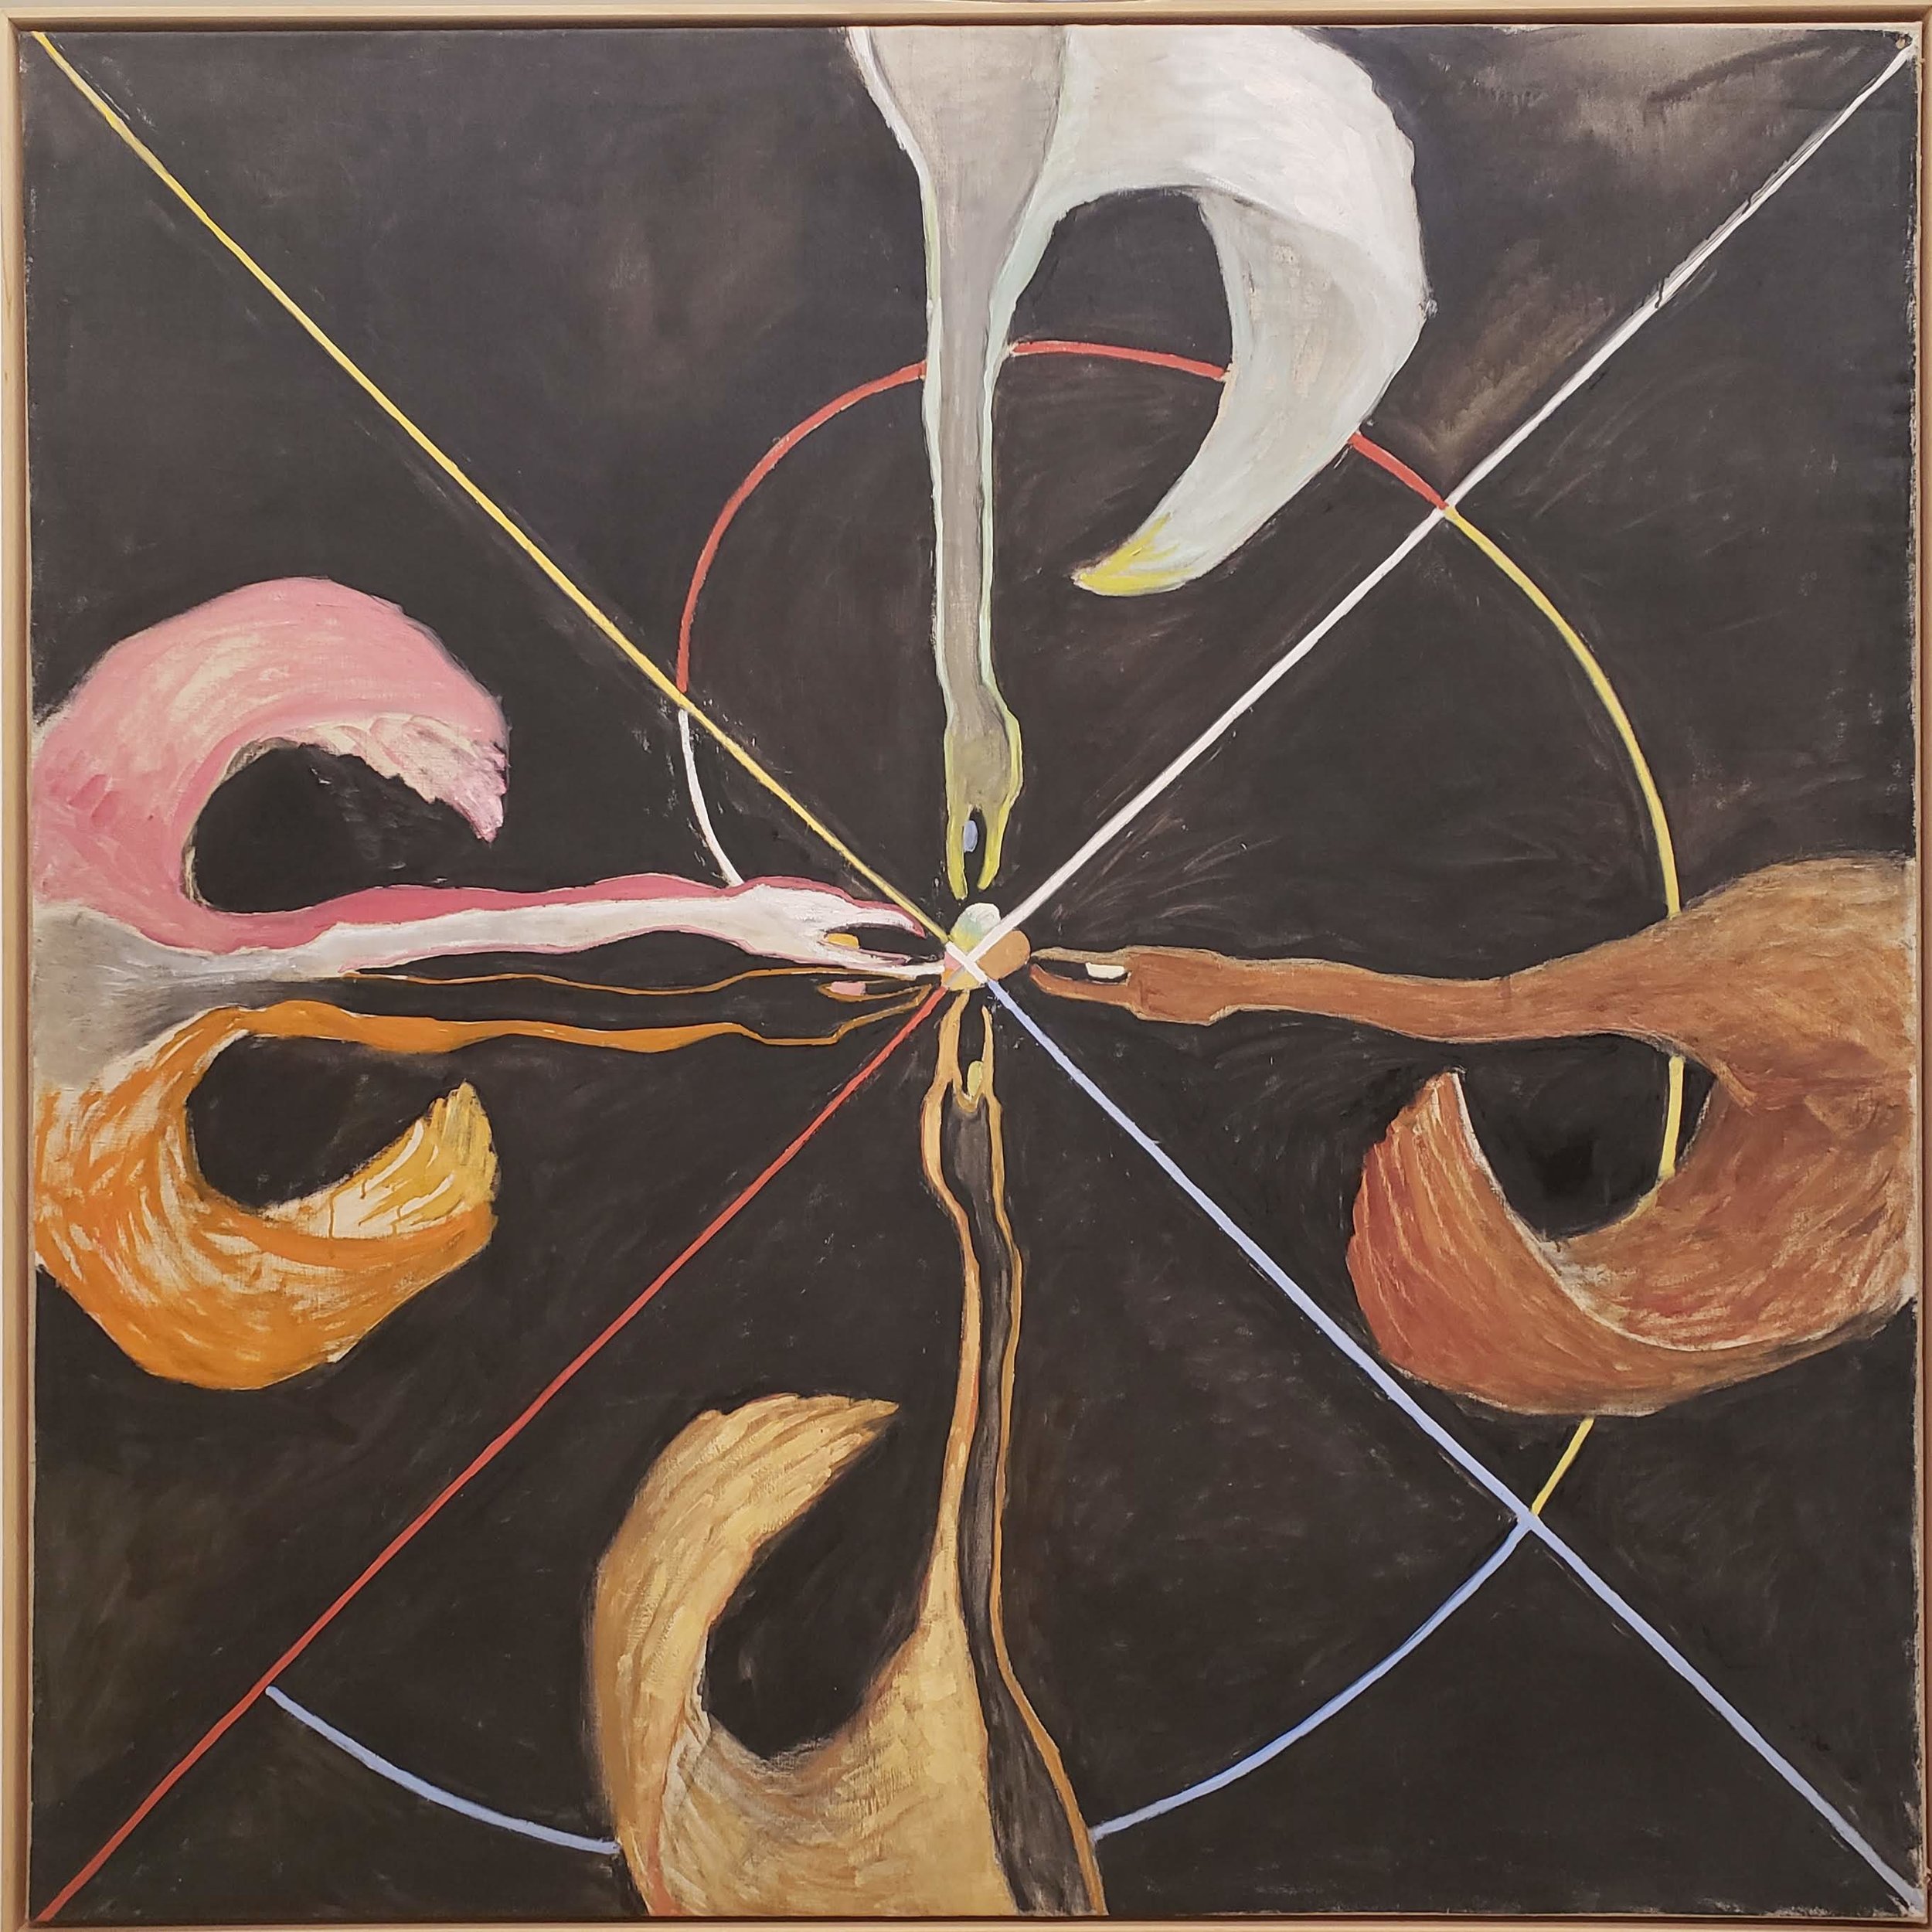 Hilma af Klint - Paintings For the Future at the Guggenheim Museum in NYC. Photo by Katie Pilgrim.